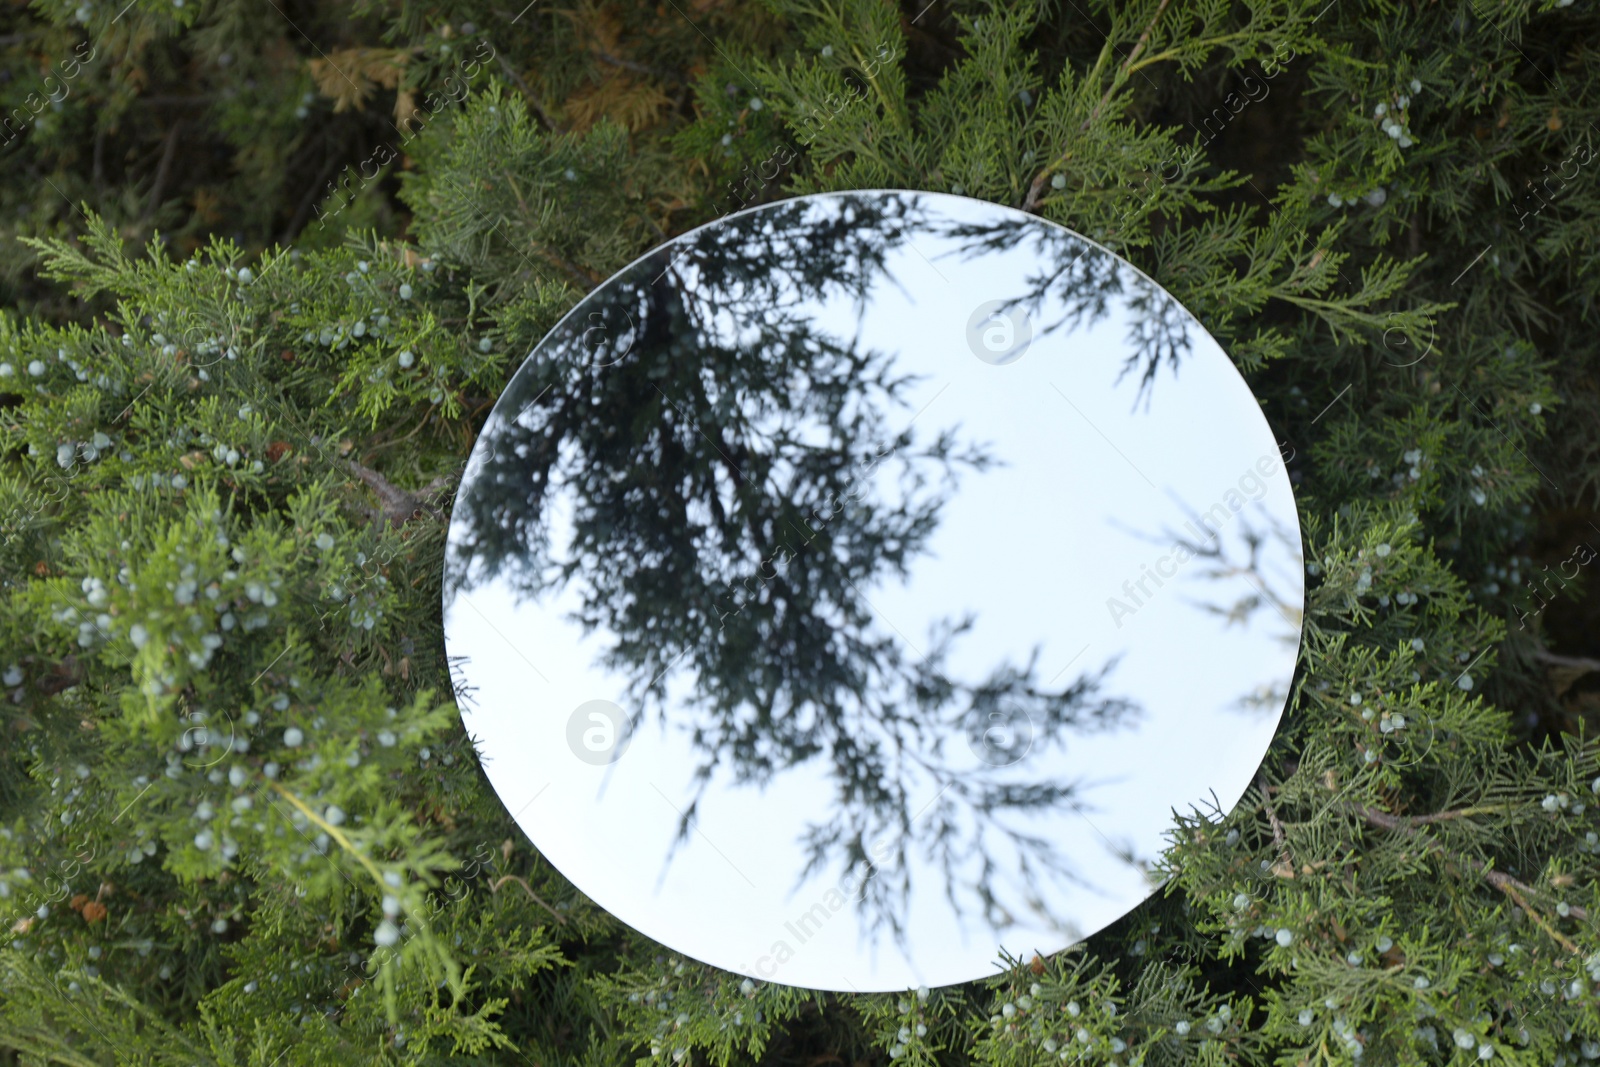 Photo of Round mirror on juniper shrub reflecting sky and branches, above view